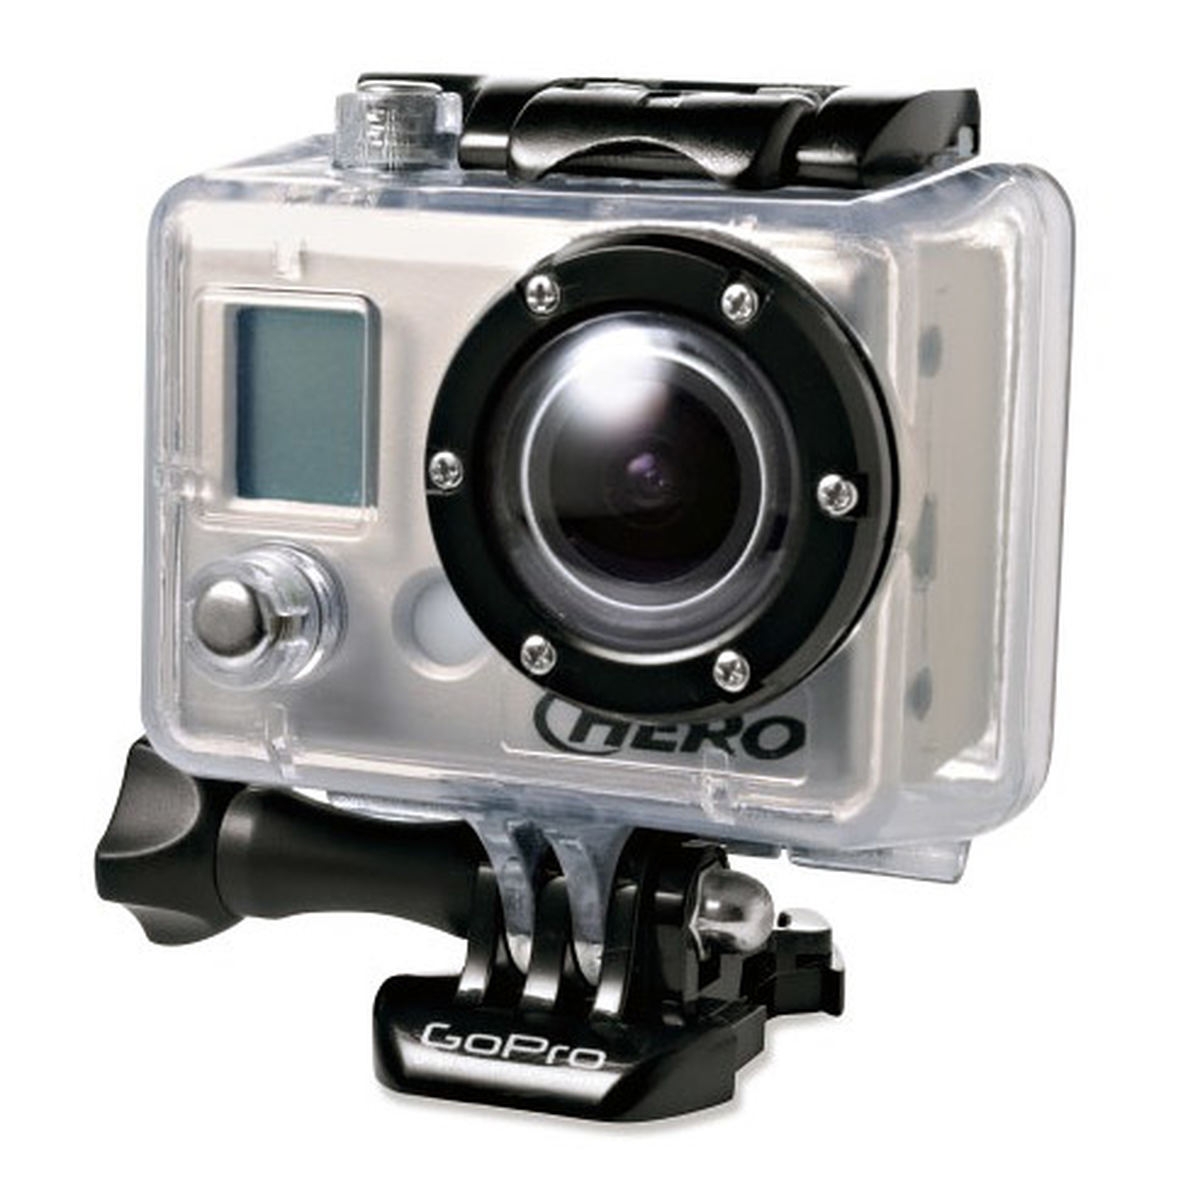 More information about "GoPro 1"